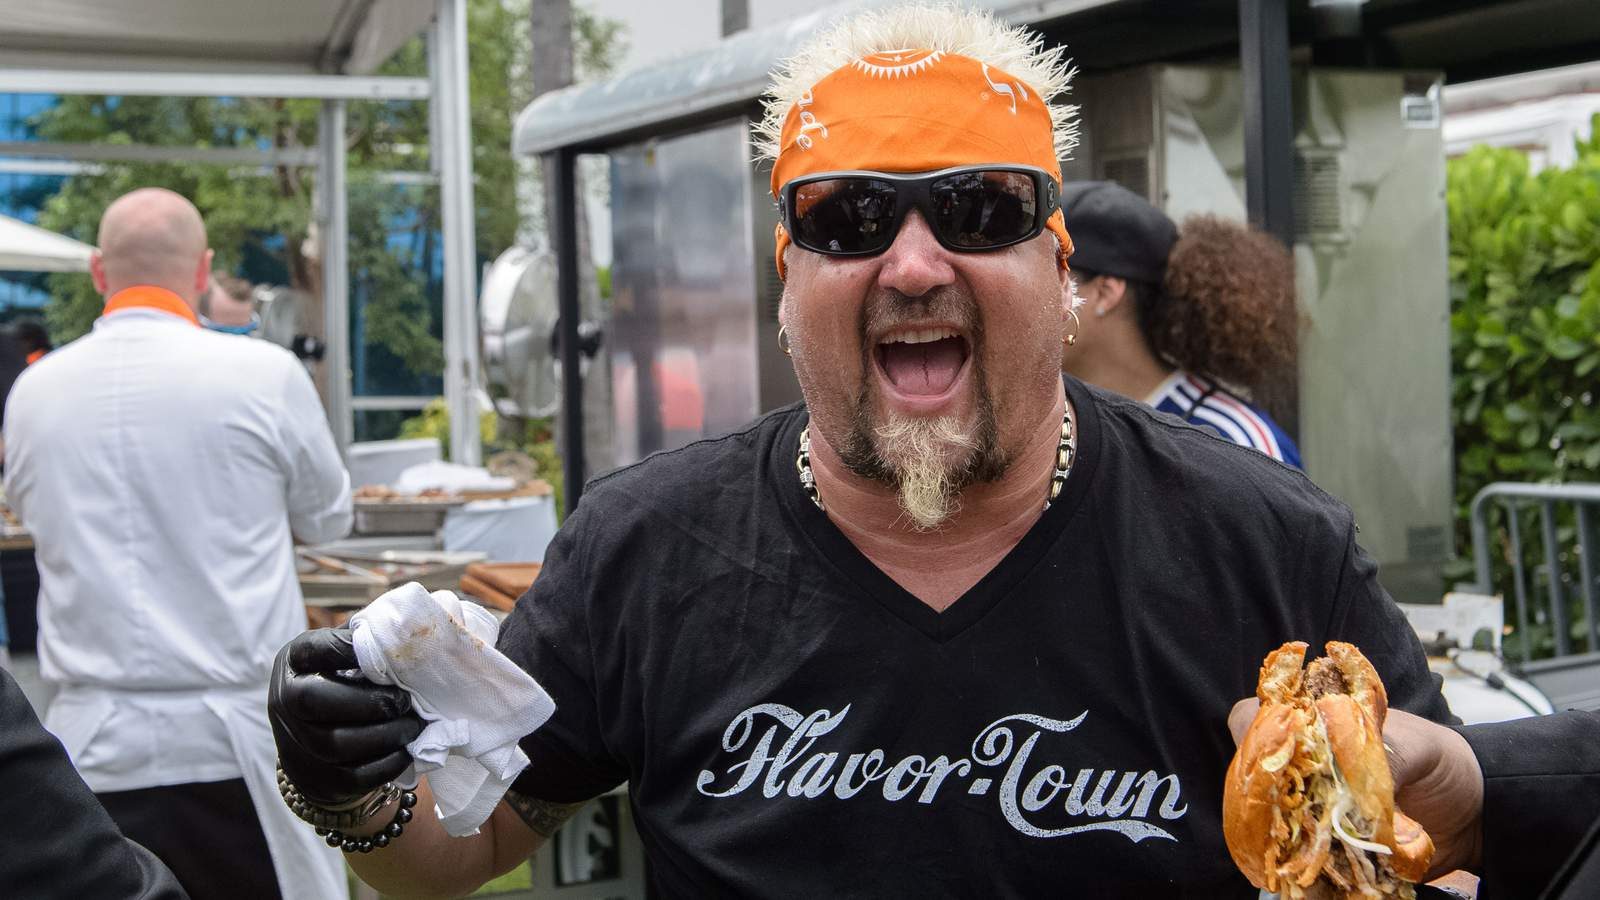 Thousands sign petition to rename Columbus, Ohio to Flavortown after native son Guy Fieri